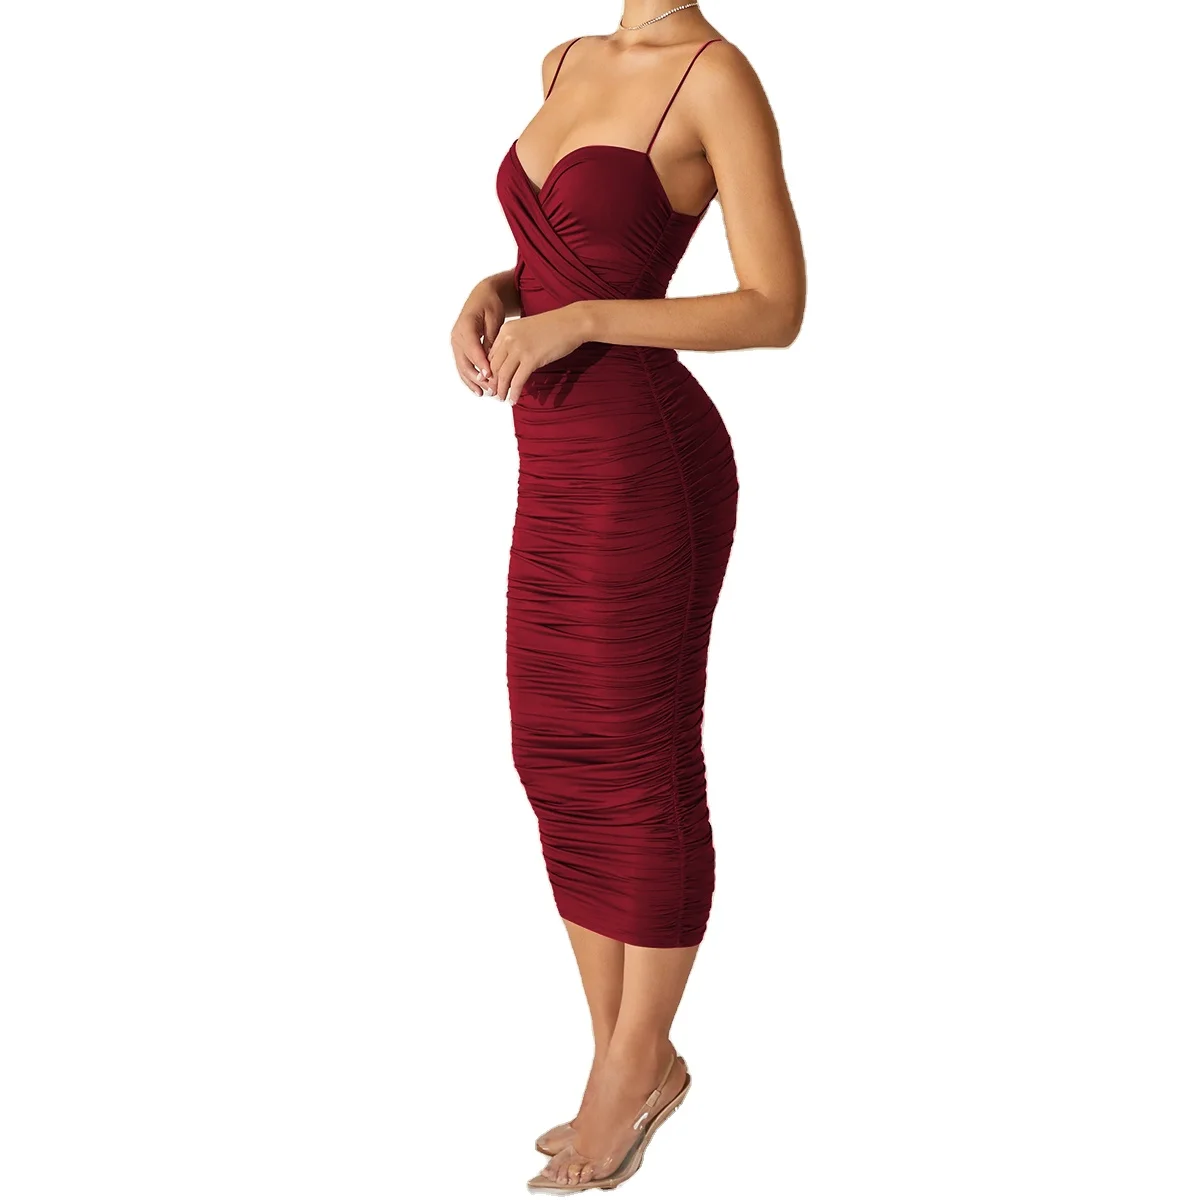 

Classic design hot night club party usage slim fit polyester spandex XS - L size midi lady dress, Picture shown